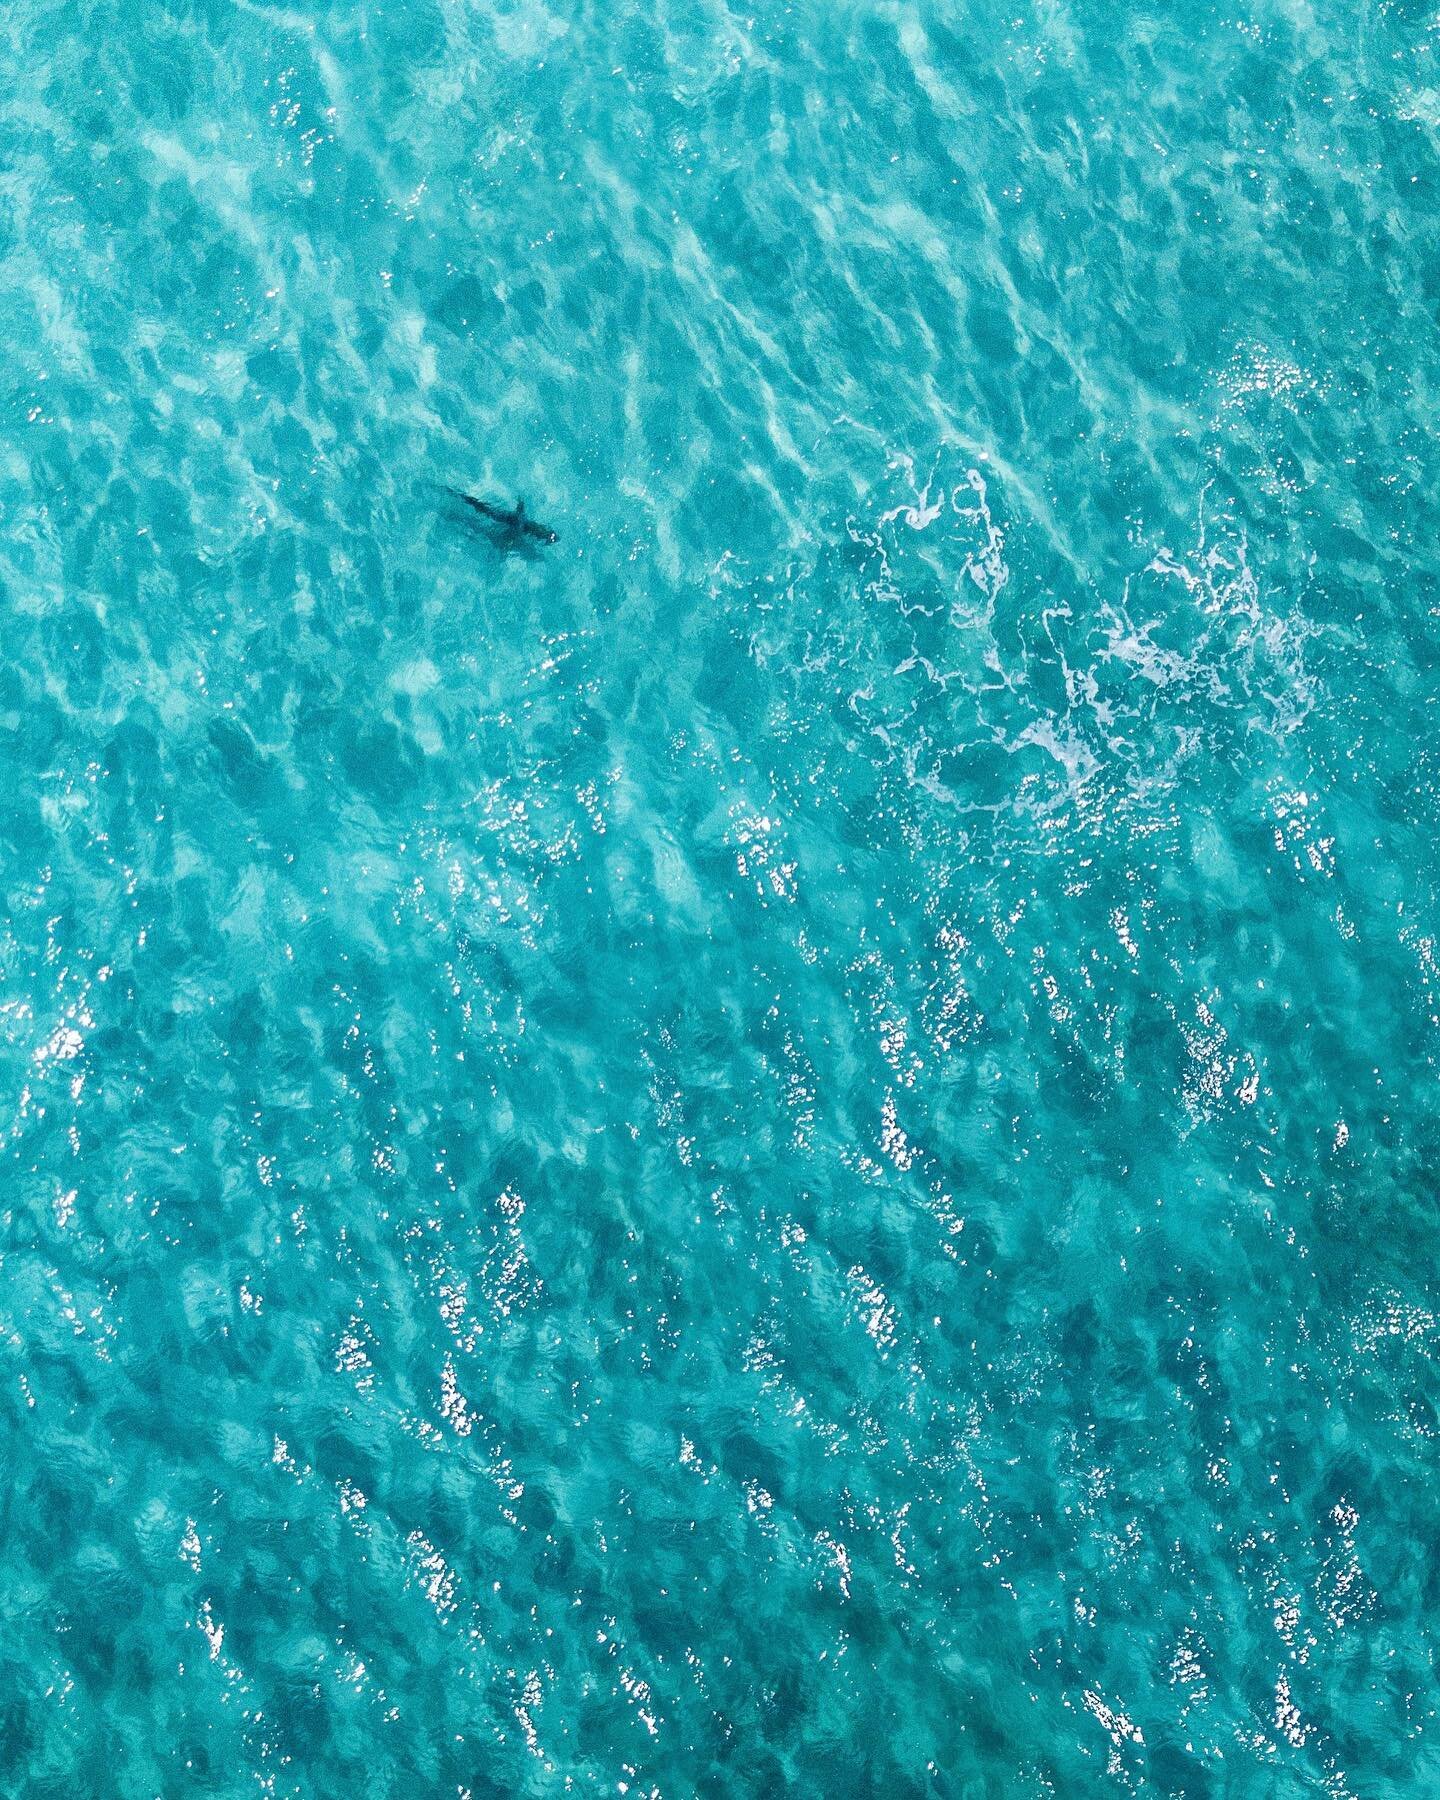 The Lone Ranger 🌊🦈

This is actually my first drone photo of a shark. I happened to spot him while flying the drone along the West Palm Beach Coast and now I think it&rsquo;s quickly becoming one of my favorite pictures 🙌🏻